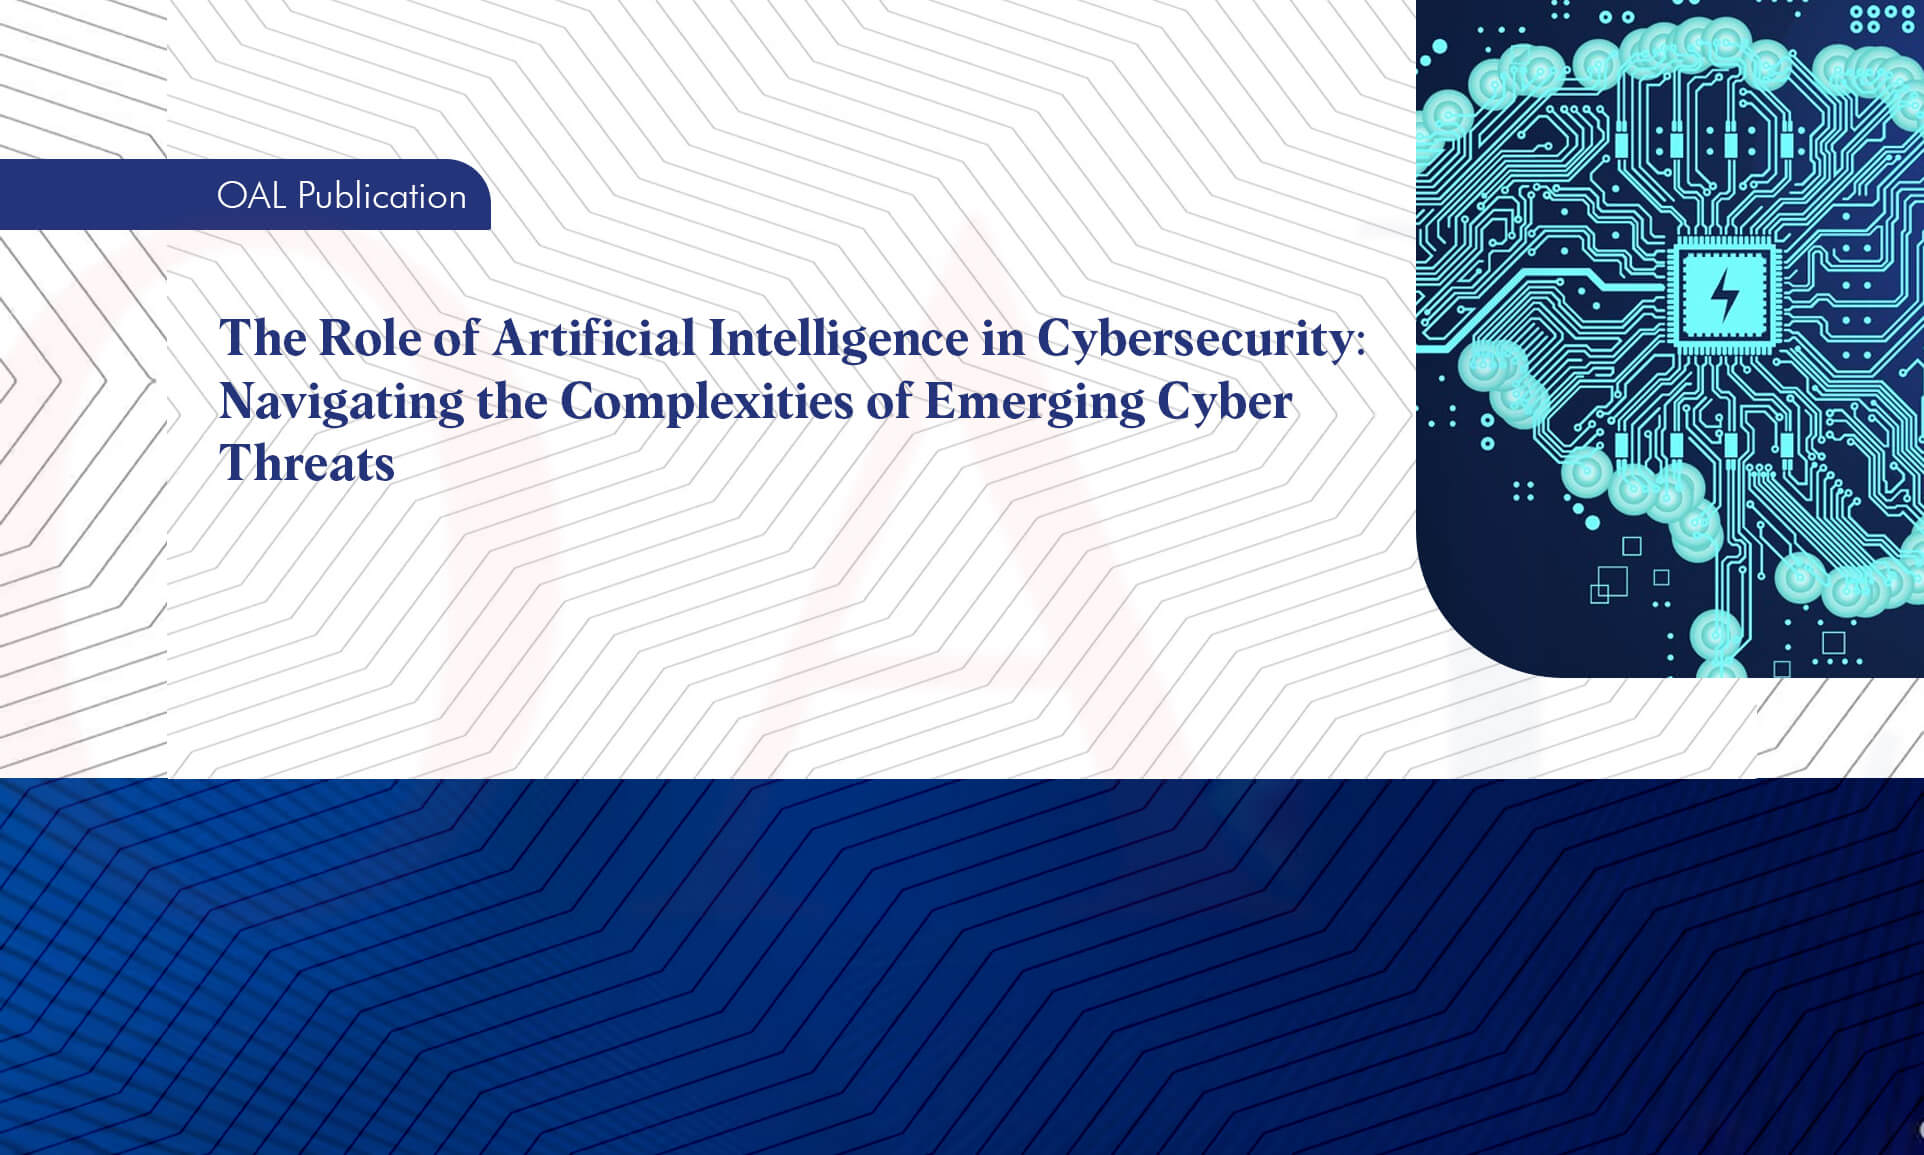 The Role of Artificial Intelligence in Cybersecurity: Navigating the Complexities of Emerging Cyber Threats